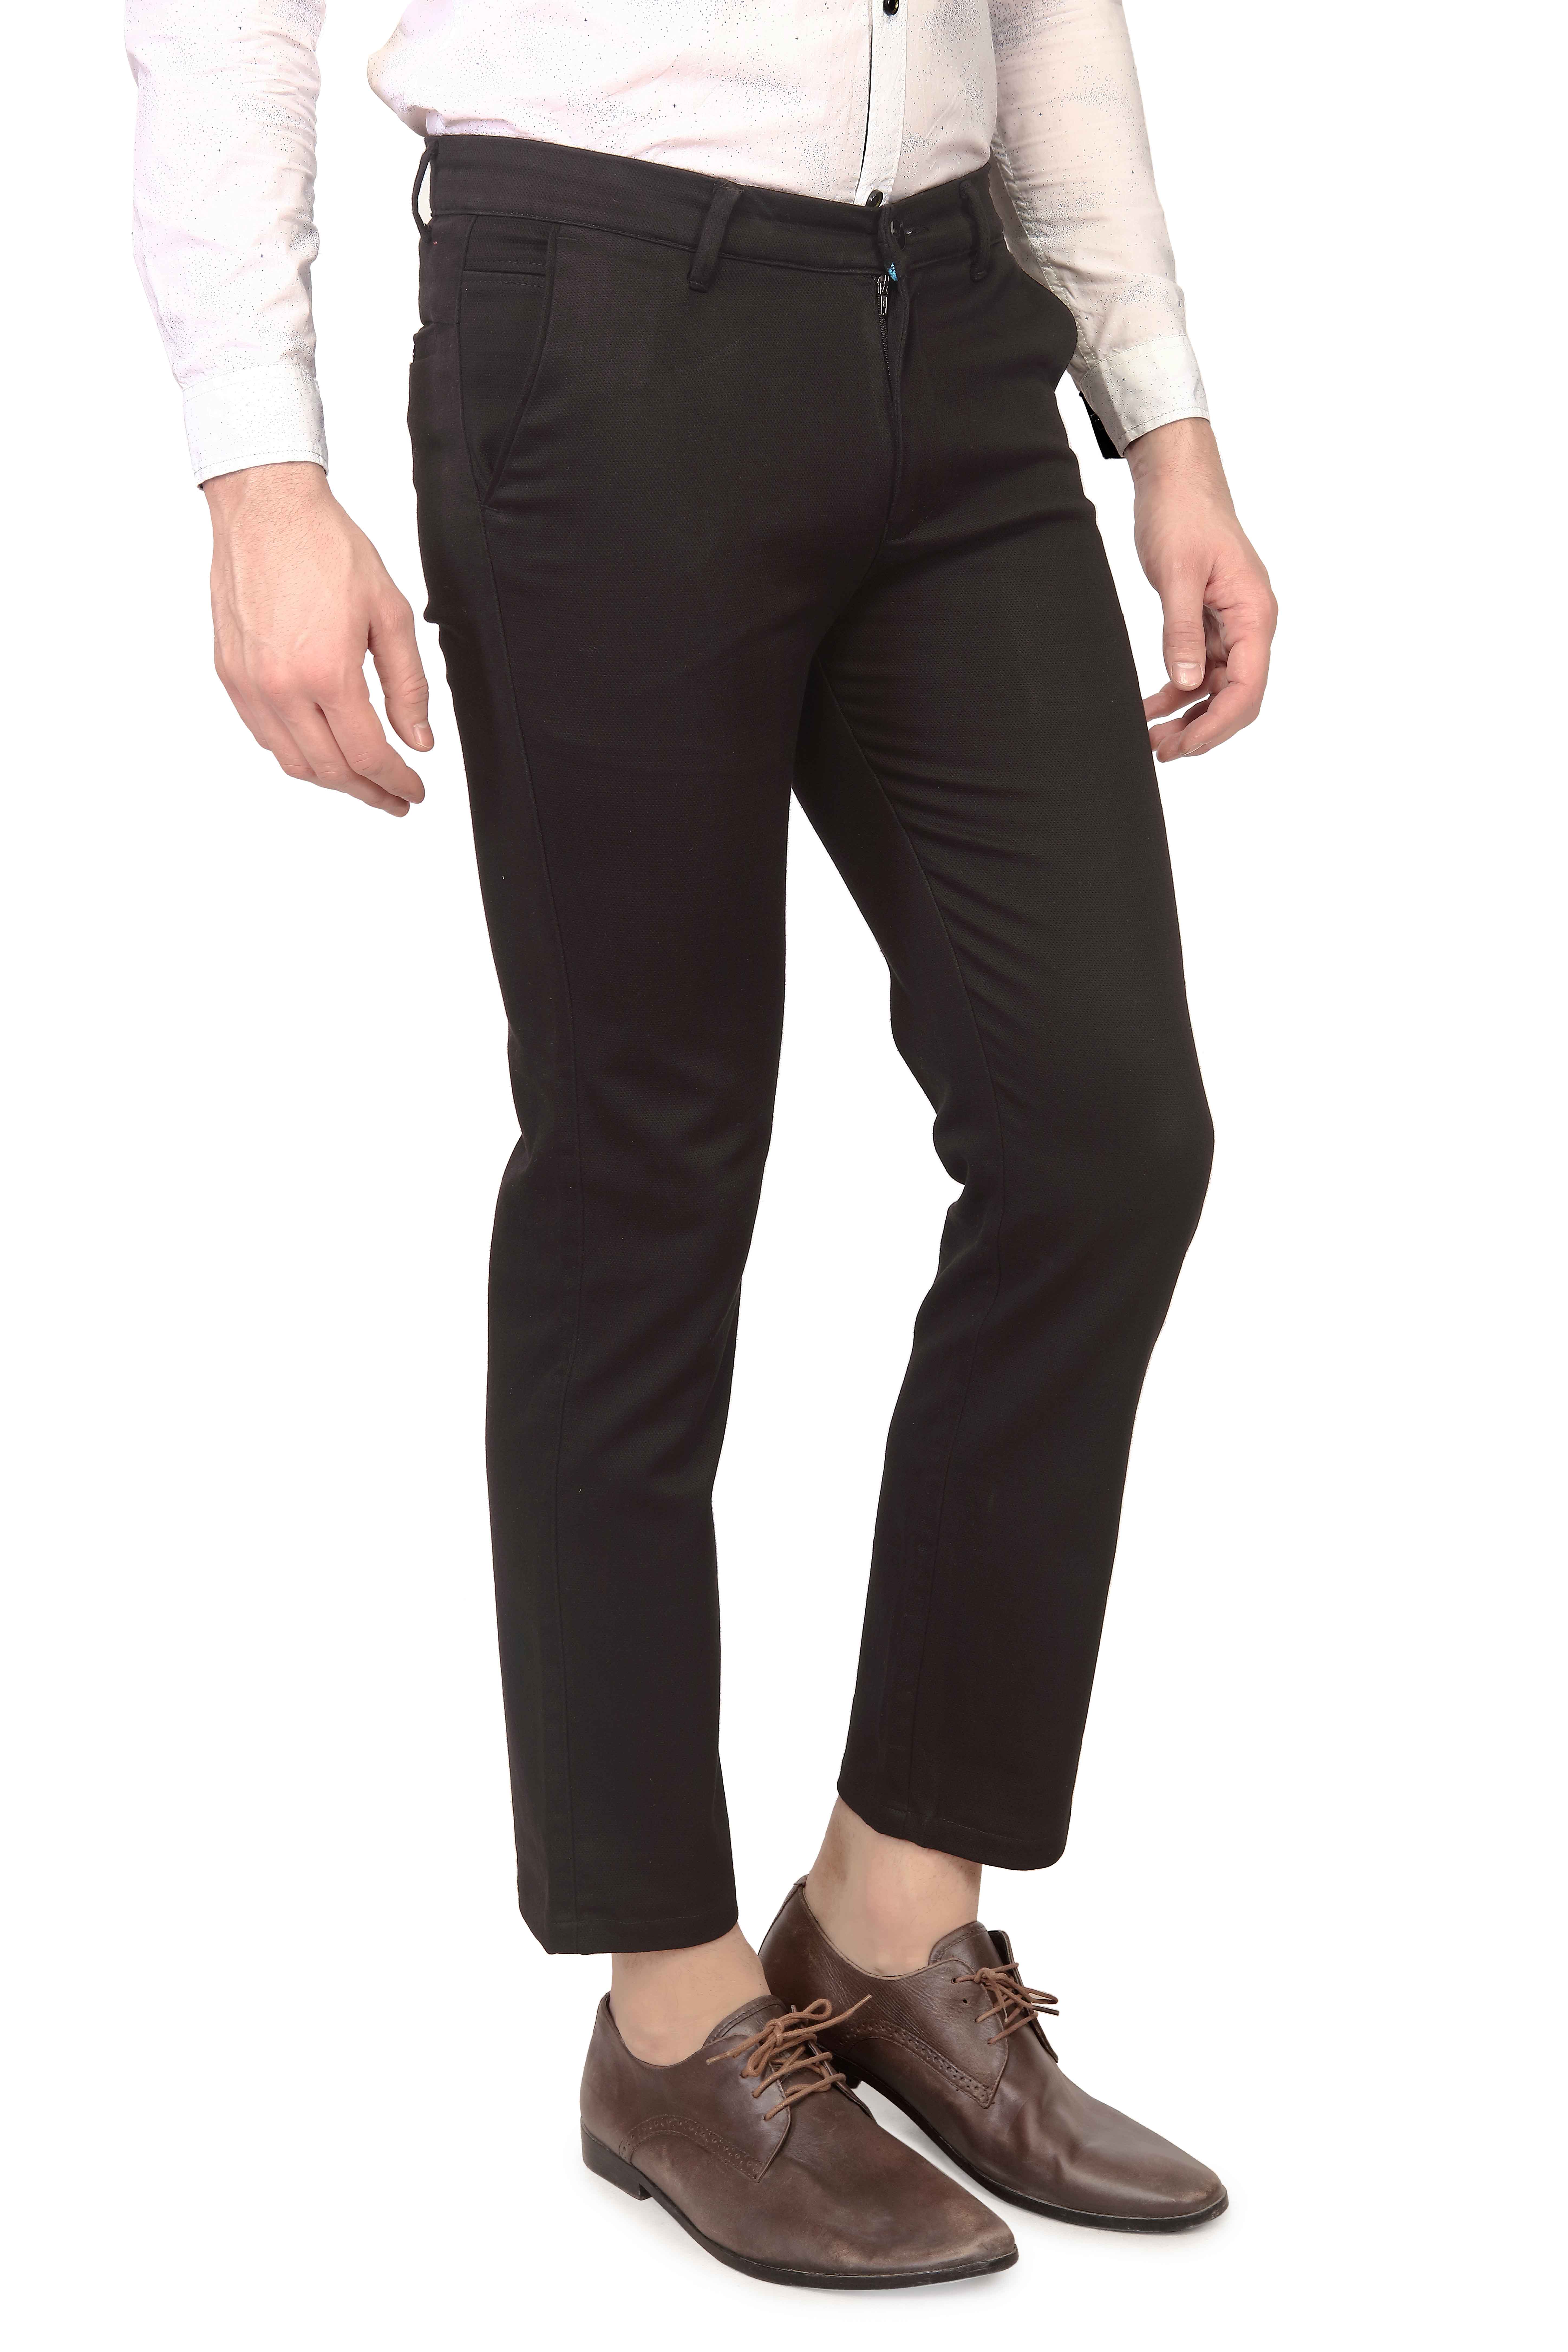 Buy Mr. Stag Men's Cotton Black Casual Trouser 30 Online @ ₹719 from ...